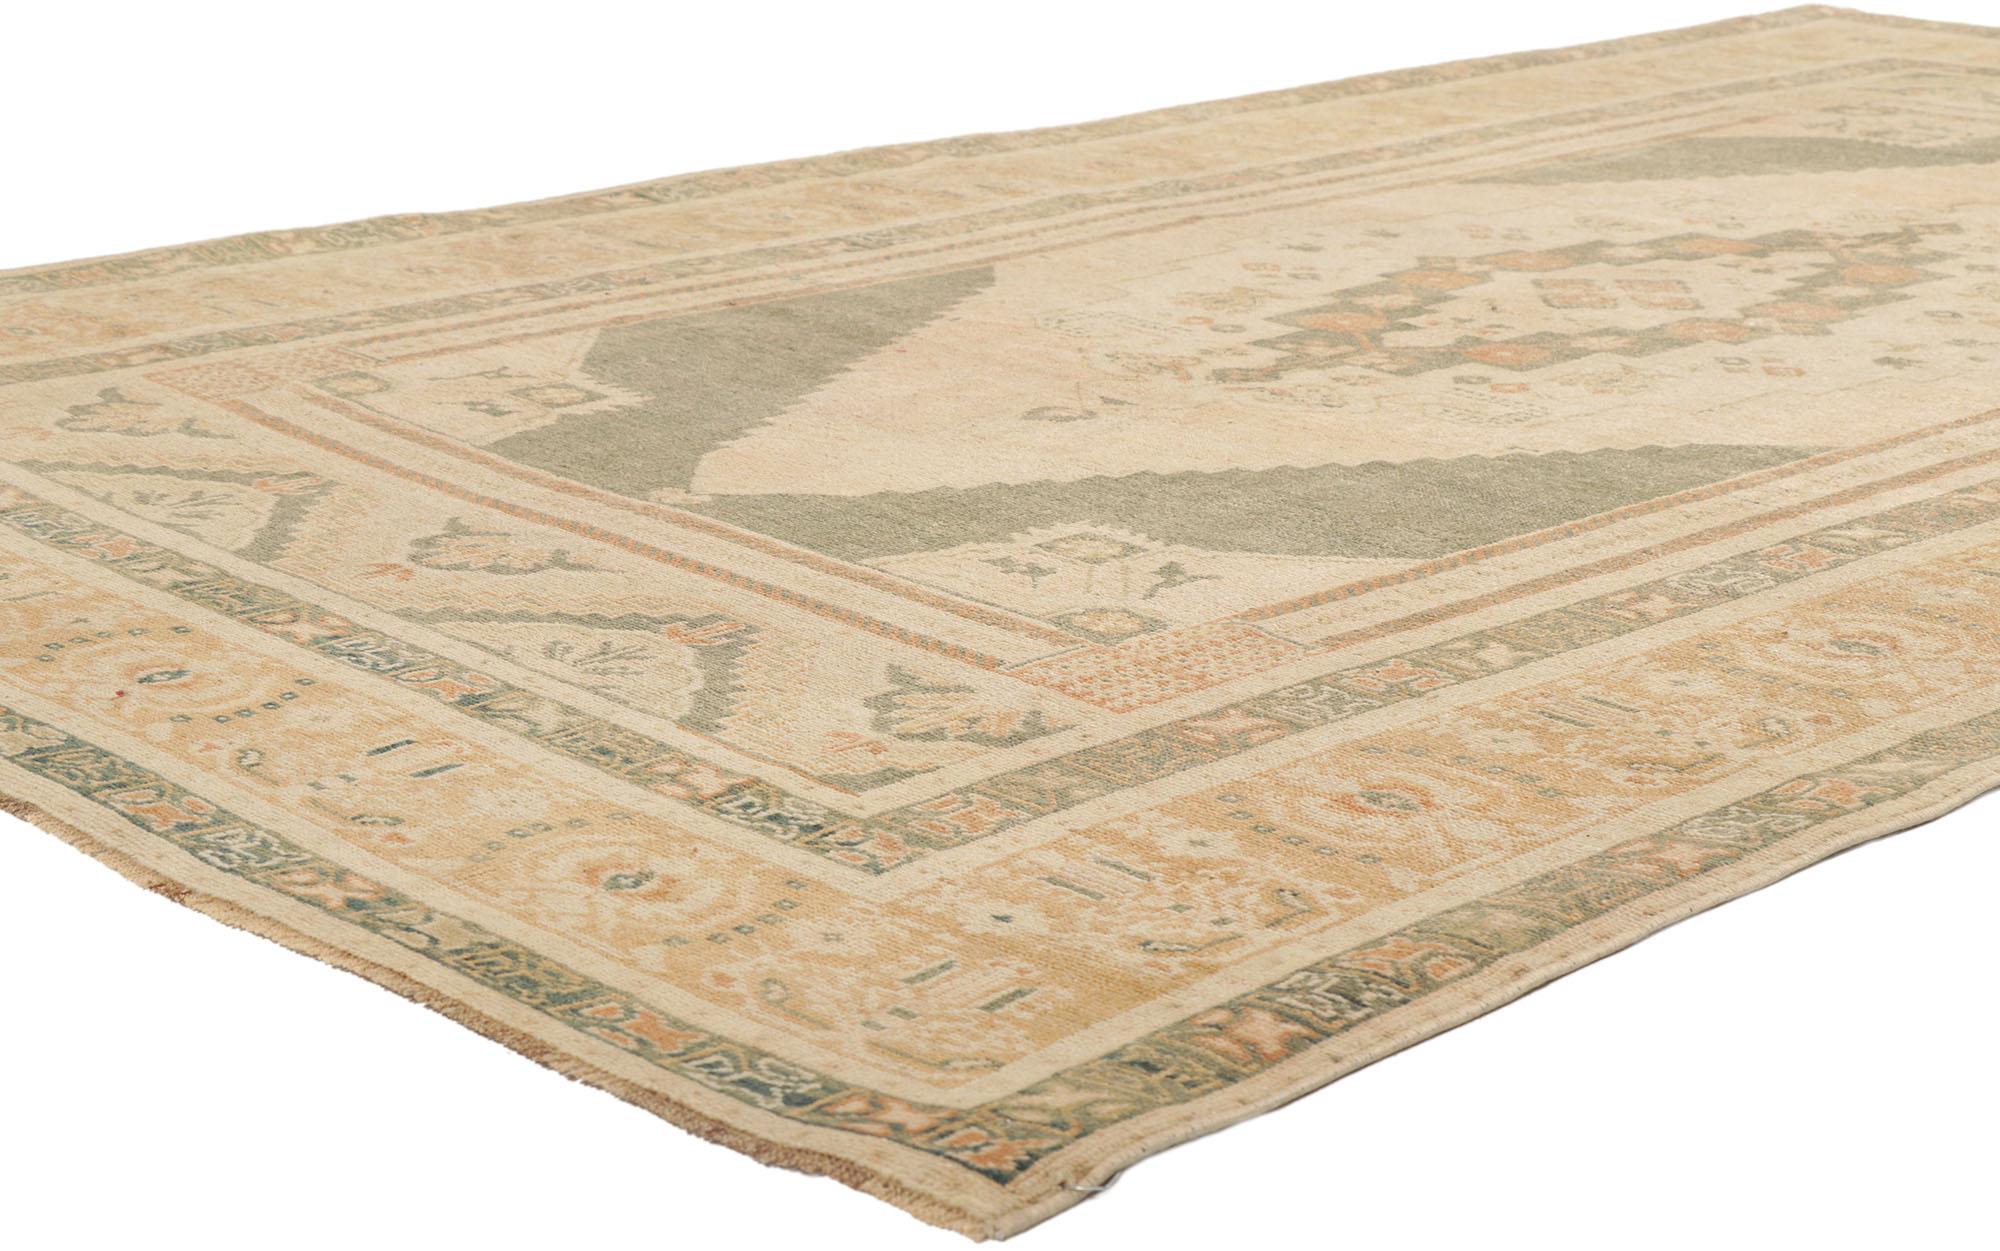 53678 Vintage Turkish Oushak Rug, 05'09 x 09'04.
Transport yourself into a world of sophisticated elegance and tranquil sensibility with this hand knotted wool vintage Turkish Oushak rug. Its intricate botanical design and nature-inspired color